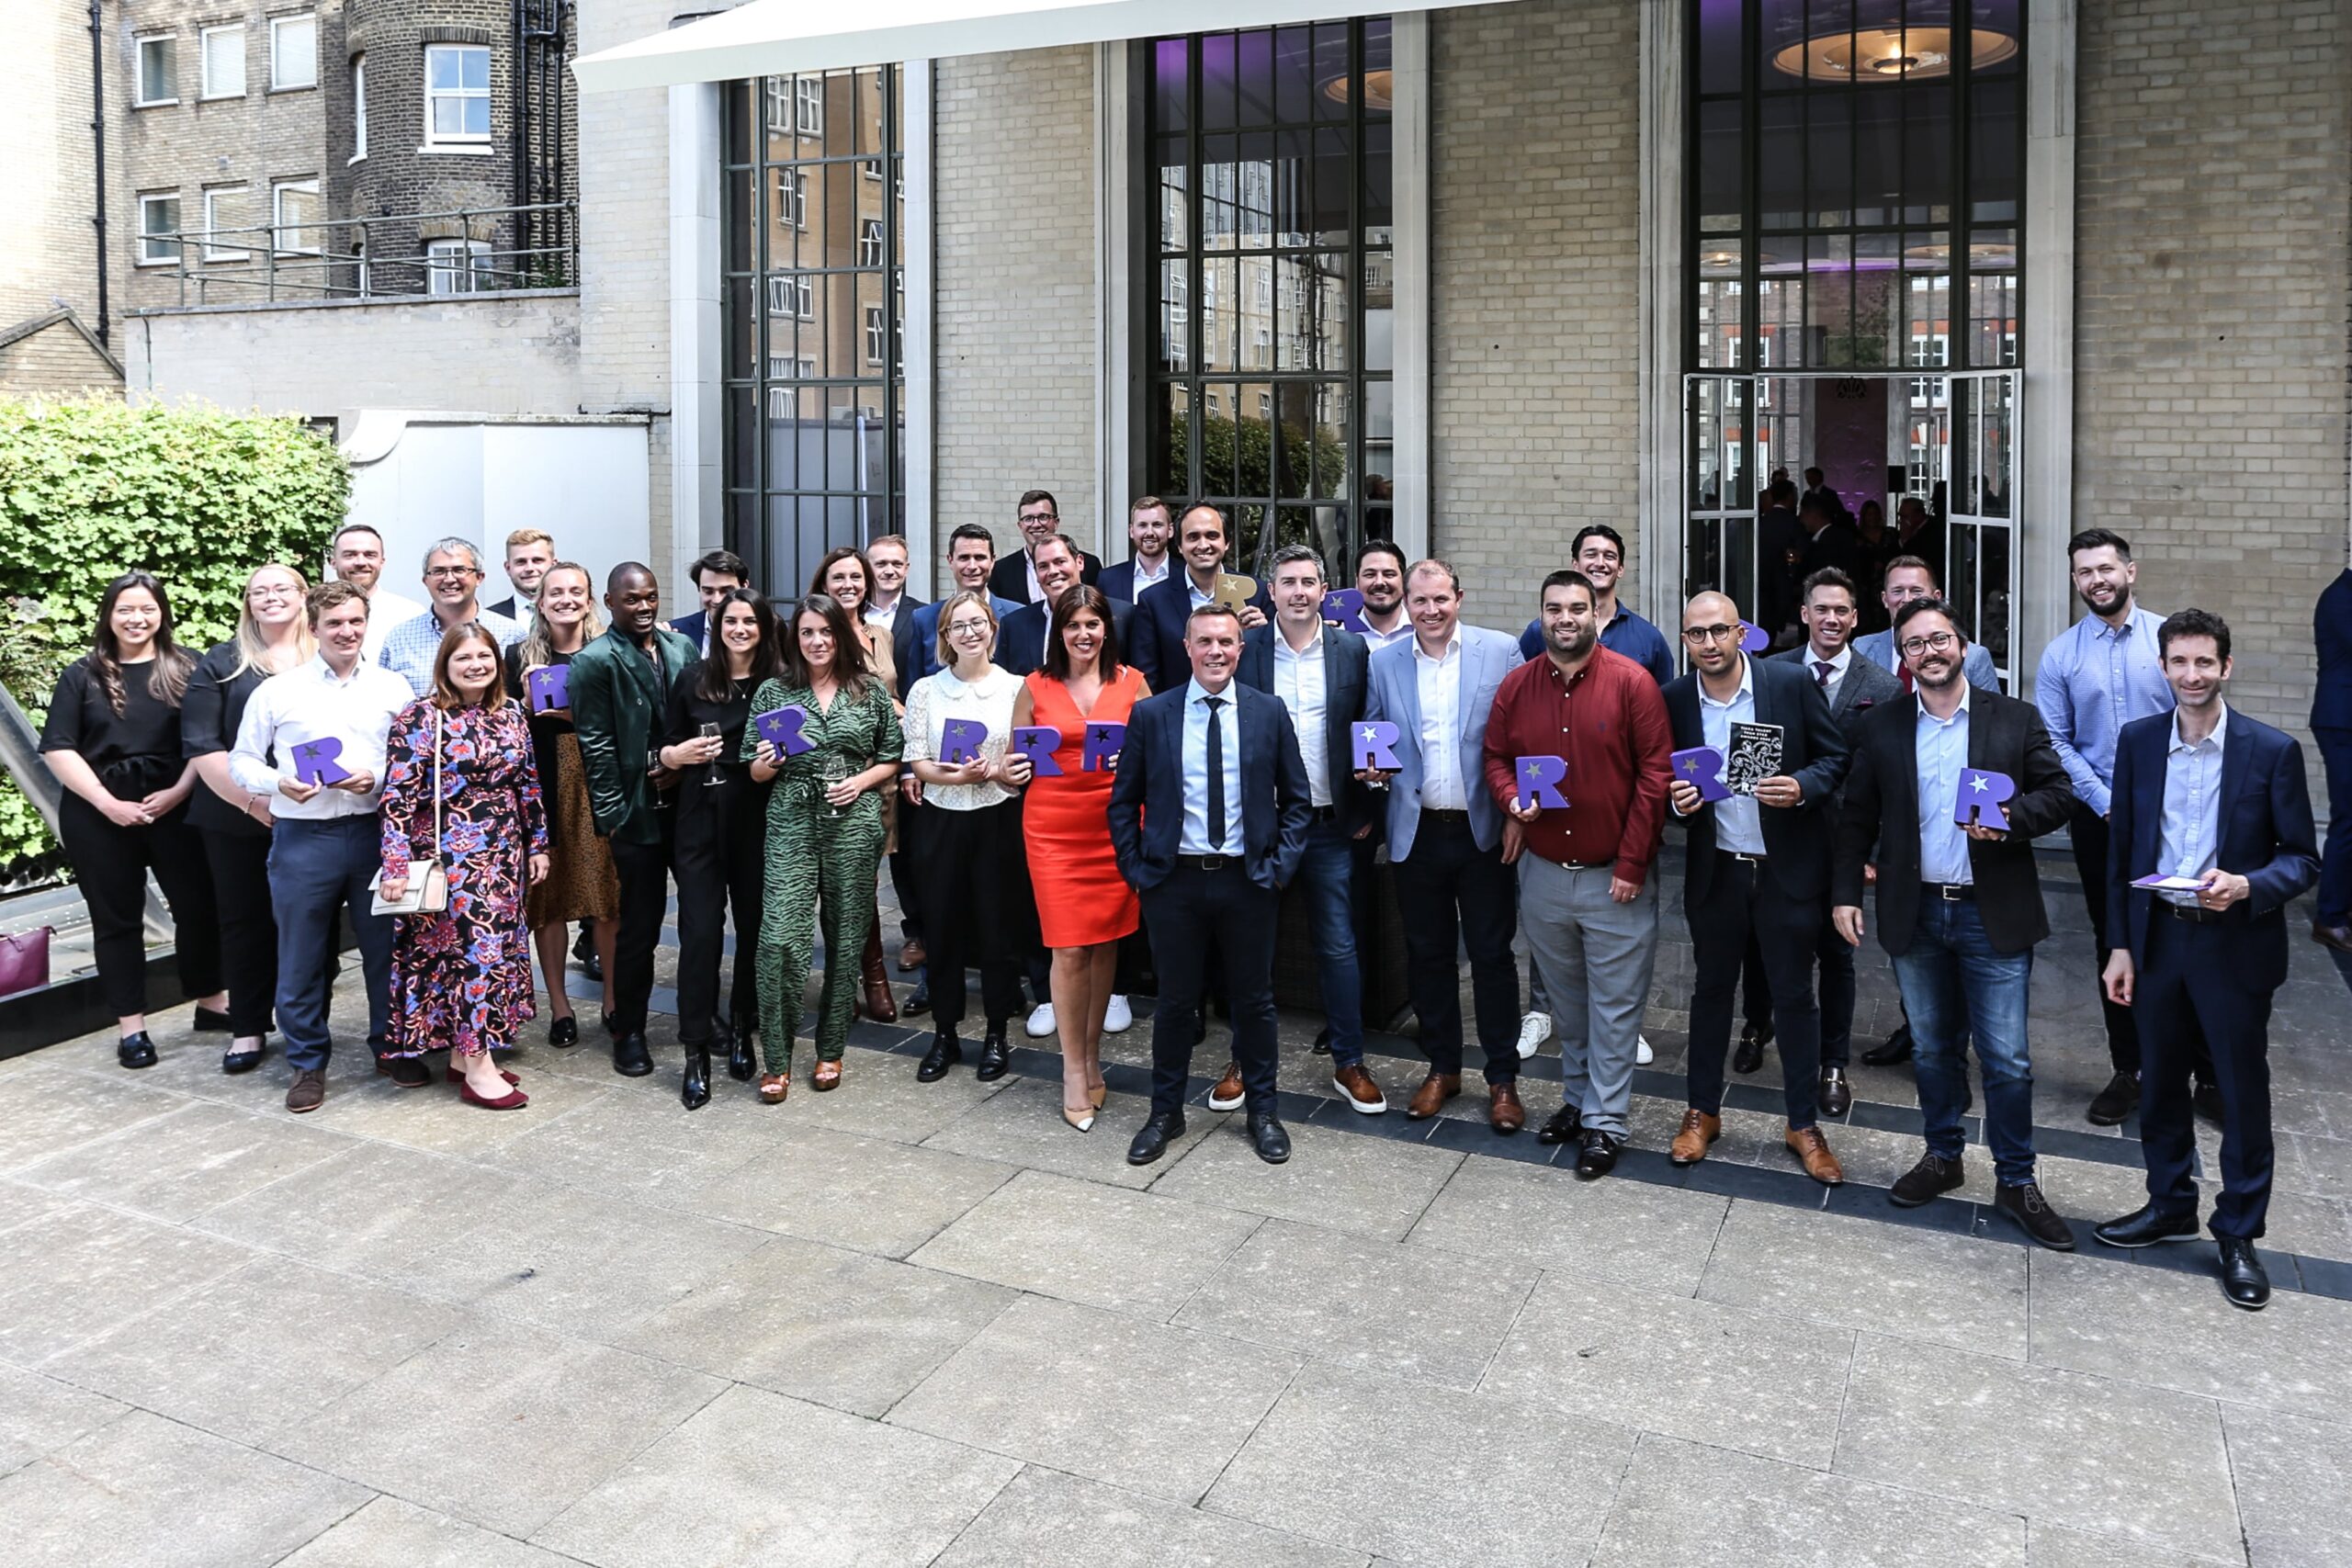 TIARA Talent Tech Award winners stand outside the RIBA  building holding up their trophies. Pixid's Daniel  Kieve (Marketing manager) and Julian Mariotti (Business Development Manager) are at the front right of the photo